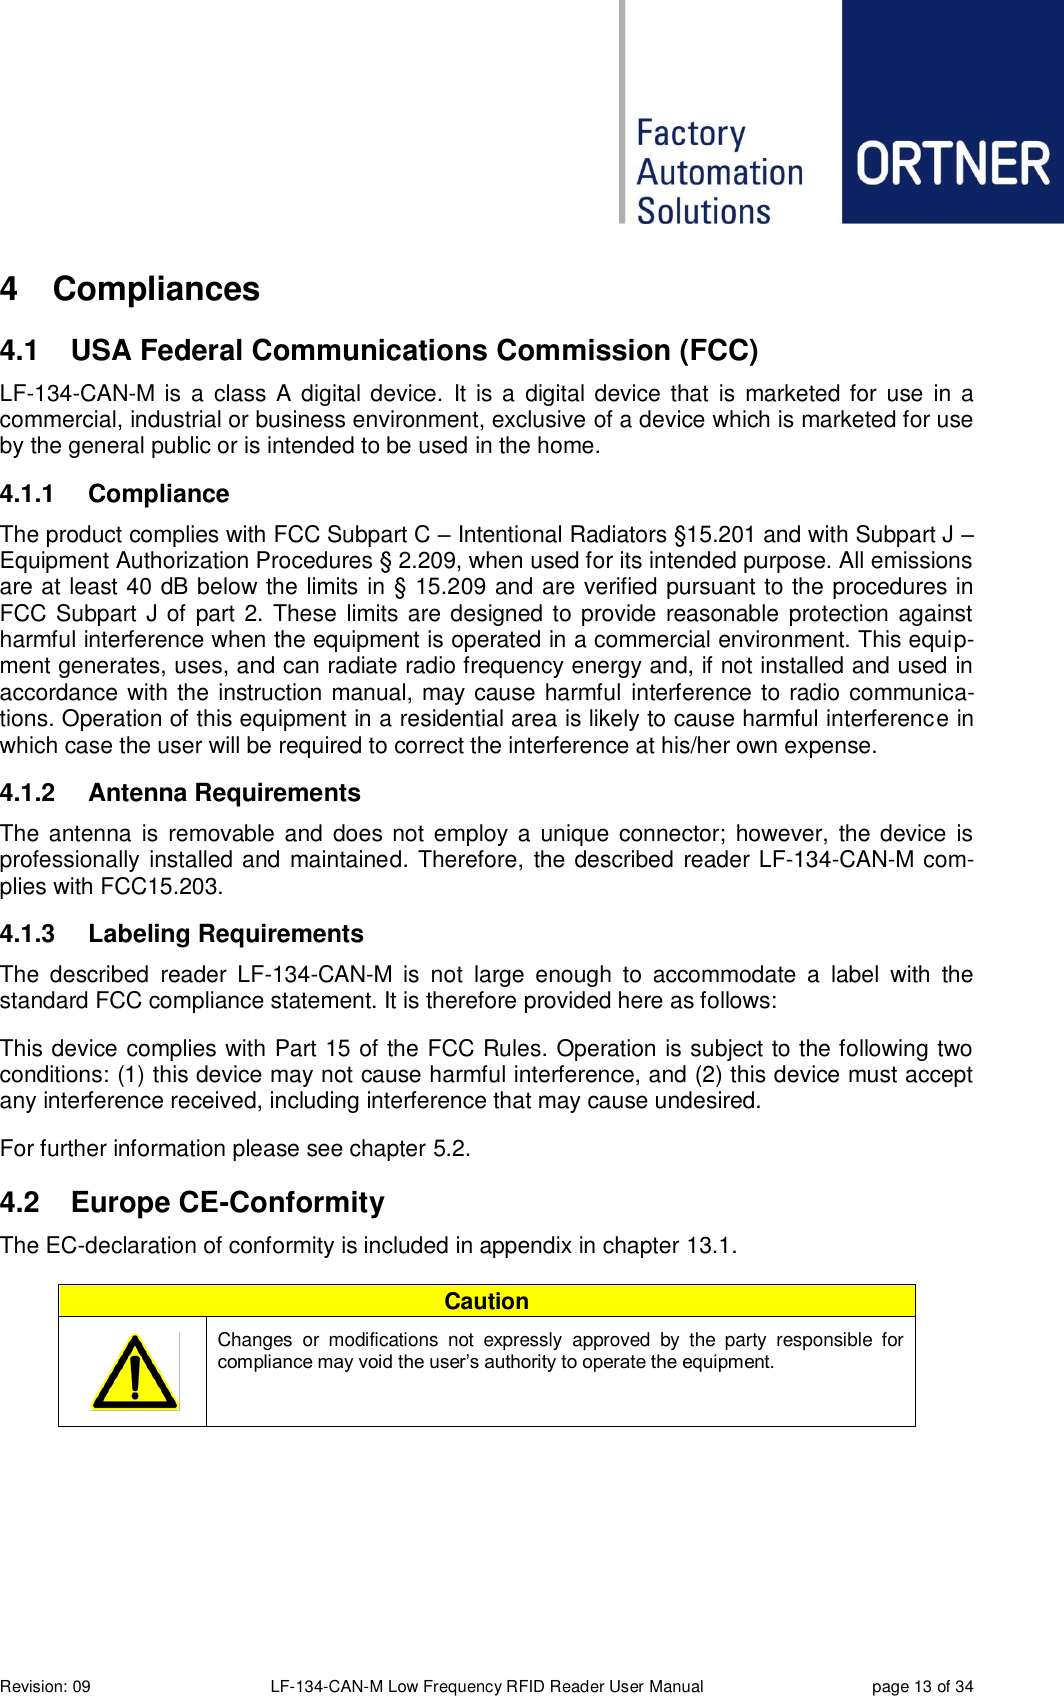  Revision: 09 LF-134-CAN-M Low Frequency RFID Reader User Manual  page 13 of 34 4  Compliances 4.1  USA Federal Communications Commission (FCC) LF-134-CAN-M  is  a  class A digital device.  It  is a digital device that  is marketed for use  in a commercial, industrial or business environment, exclusive of a device which is marketed for use by the general public or is intended to be used in the home. 4.1.1  Compliance The product complies with FCC Subpart C – Intentional Radiators §15.201 and with Subpart J – Equipment Authorization Procedures § 2.209, when used for its intended purpose. All emissions are at least 40 dB below the limits in § 15.209 and are verified pursuant to the procedures in FCC Subpart J of part 2. These limits are designed to provide reasonable protection against harmful interference when the equipment is operated in a commercial environment. This equip-ment generates, uses, and can radiate radio frequency energy and, if not installed and used in accordance with the instruction manual, may cause harmful  interference to radio communica-tions. Operation of this equipment in a residential area is likely to cause harmful interference in which case the user will be required to correct the interference at his/her own expense. 4.1.2  Antenna Requirements The antenna is  removable and  does  not employ a unique connector; however, the device  is professionally installed and maintained. Therefore, the described reader LF-134-CAN-M  com-plies with FCC15.203. 4.1.3  Labeling Requirements The  described  reader  LF-134-CAN-M  is  not  large  enough  to  accommodate  a  label  with  the standard FCC compliance statement. It is therefore provided here as follows: This device complies with Part 15 of the FCC Rules. Operation is subject to the following two conditions: (1) this device may not cause harmful interference, and (2) this device must accept any interference received, including interference that may cause undesired. For further information please see chapter 5.2. 4.2  Europe CE-Conformity The EC-declaration of conformity is included in appendix in chapter 13.1. Caution       Changes  or  modifications  not  expressly  approved  by  the  party  responsible  for compliance may void the user’s authority to operate the equipment.  